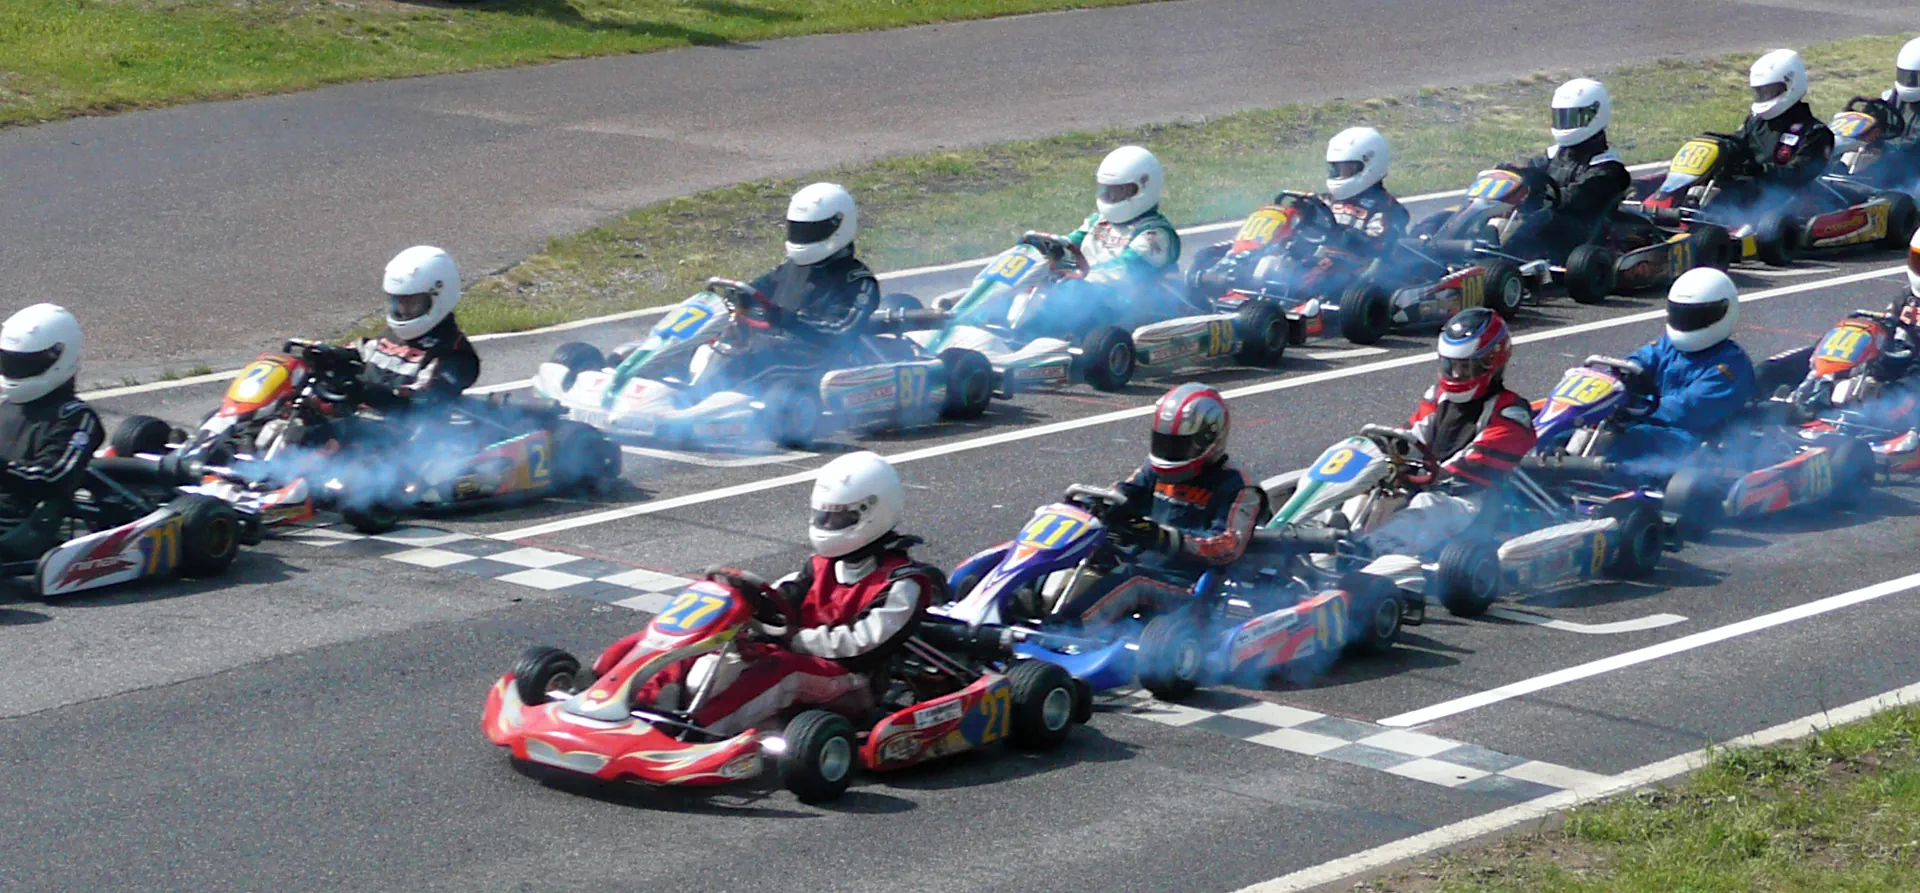 Thick clouds of exhaust at a karting race start. Go-kart drivers pollute the environment.